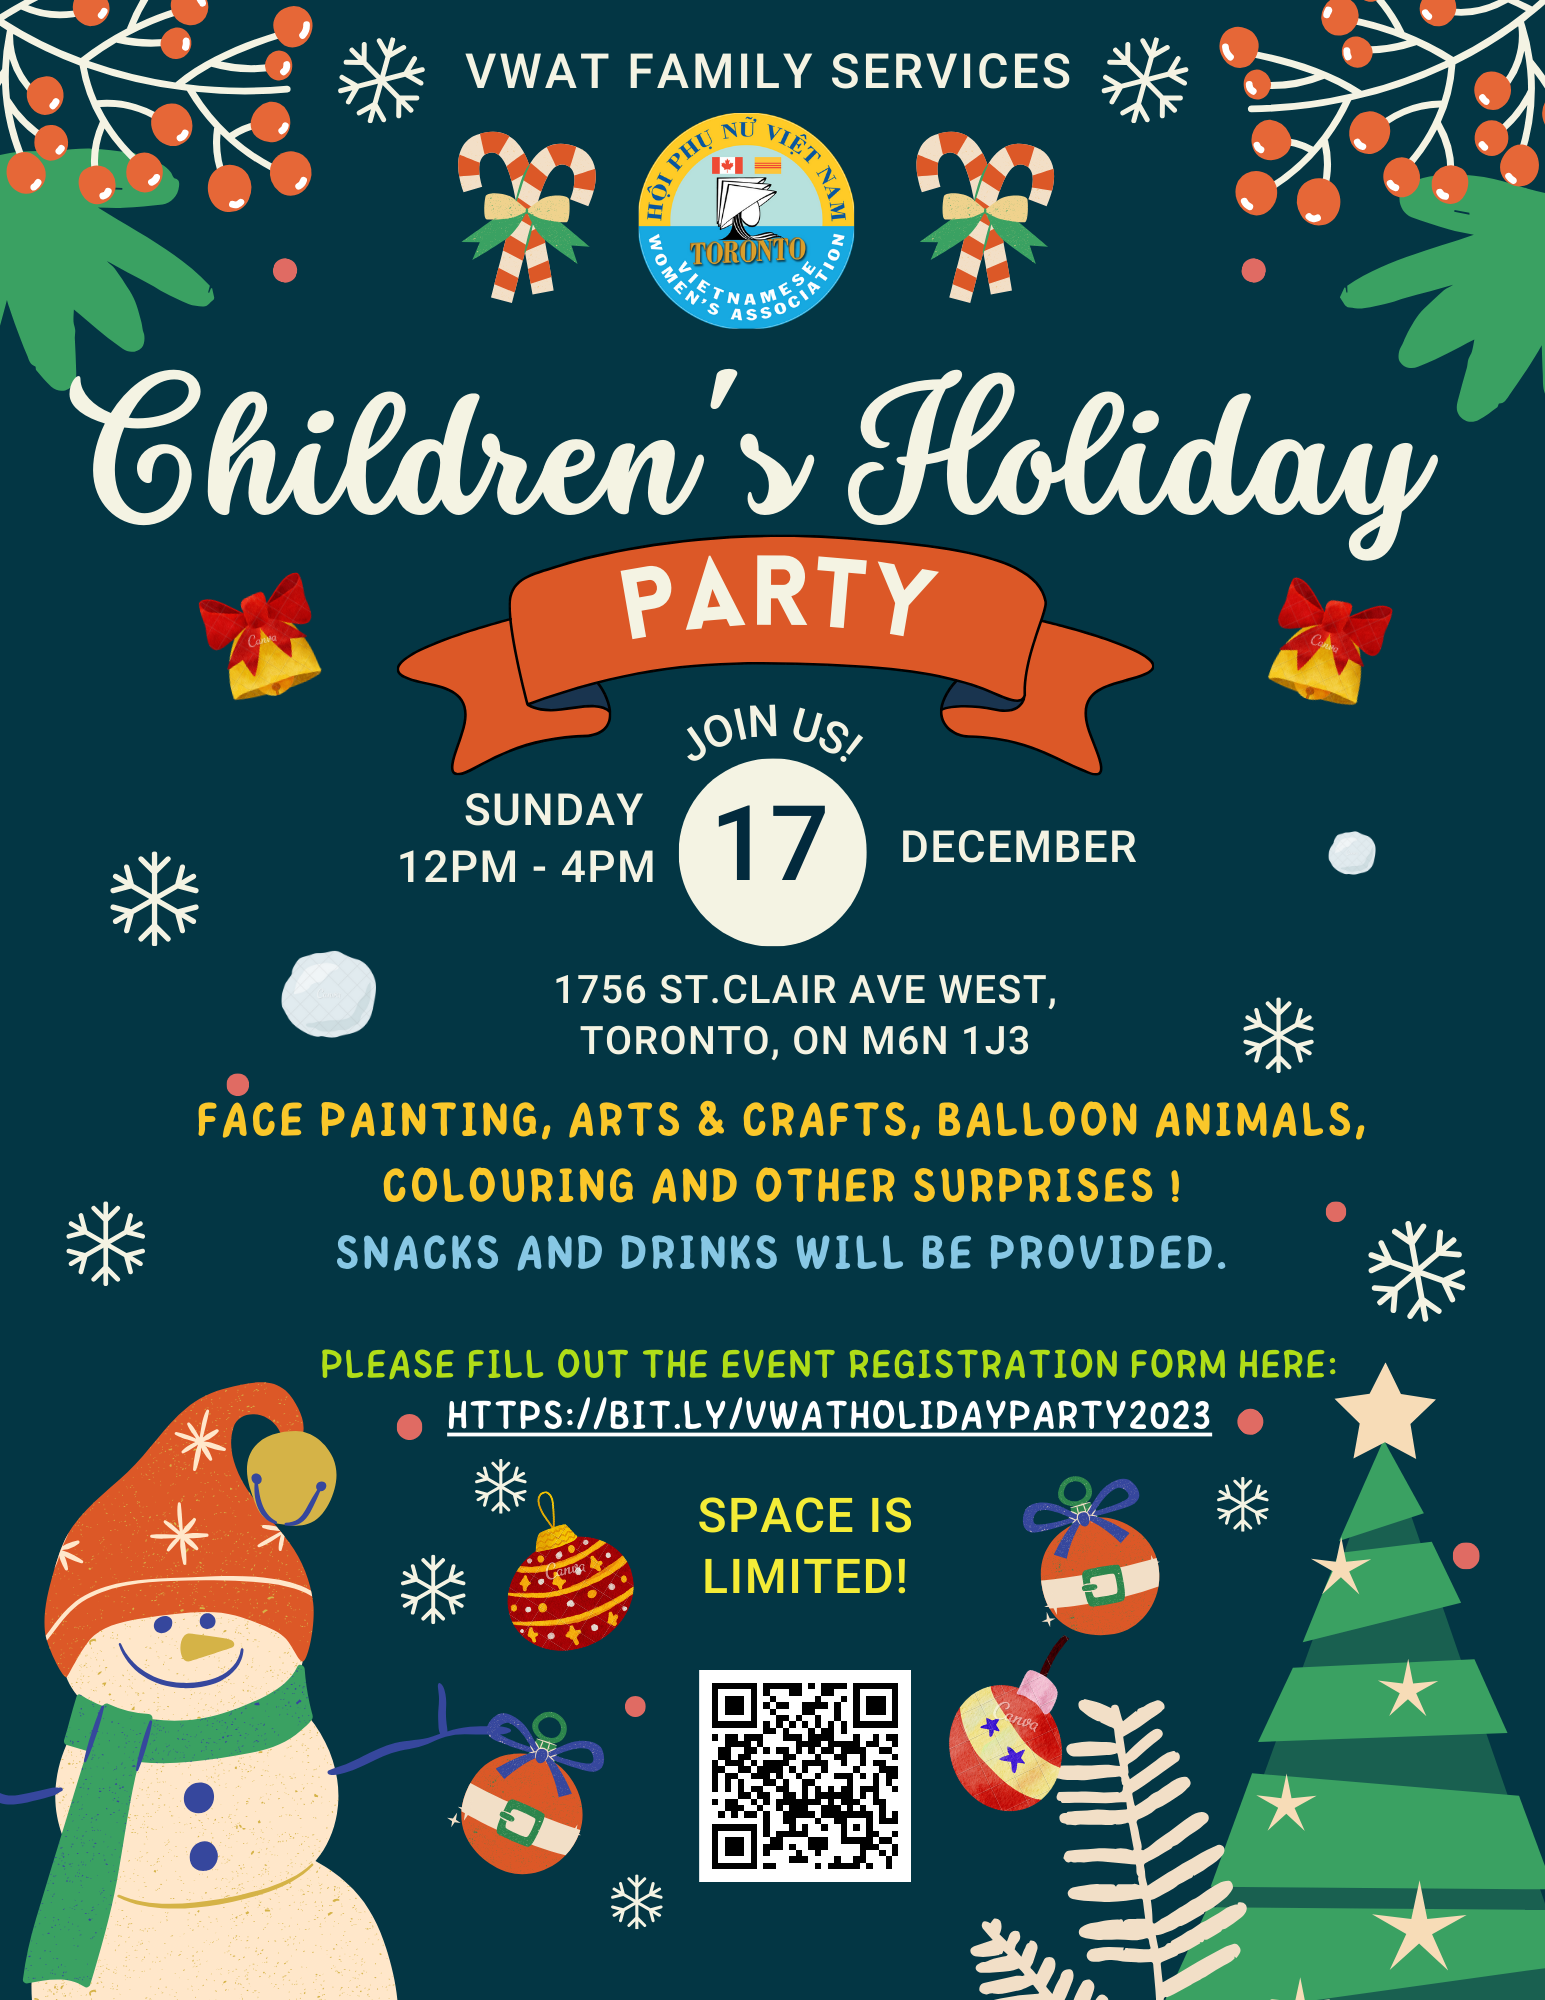 Children’s Holiday Party